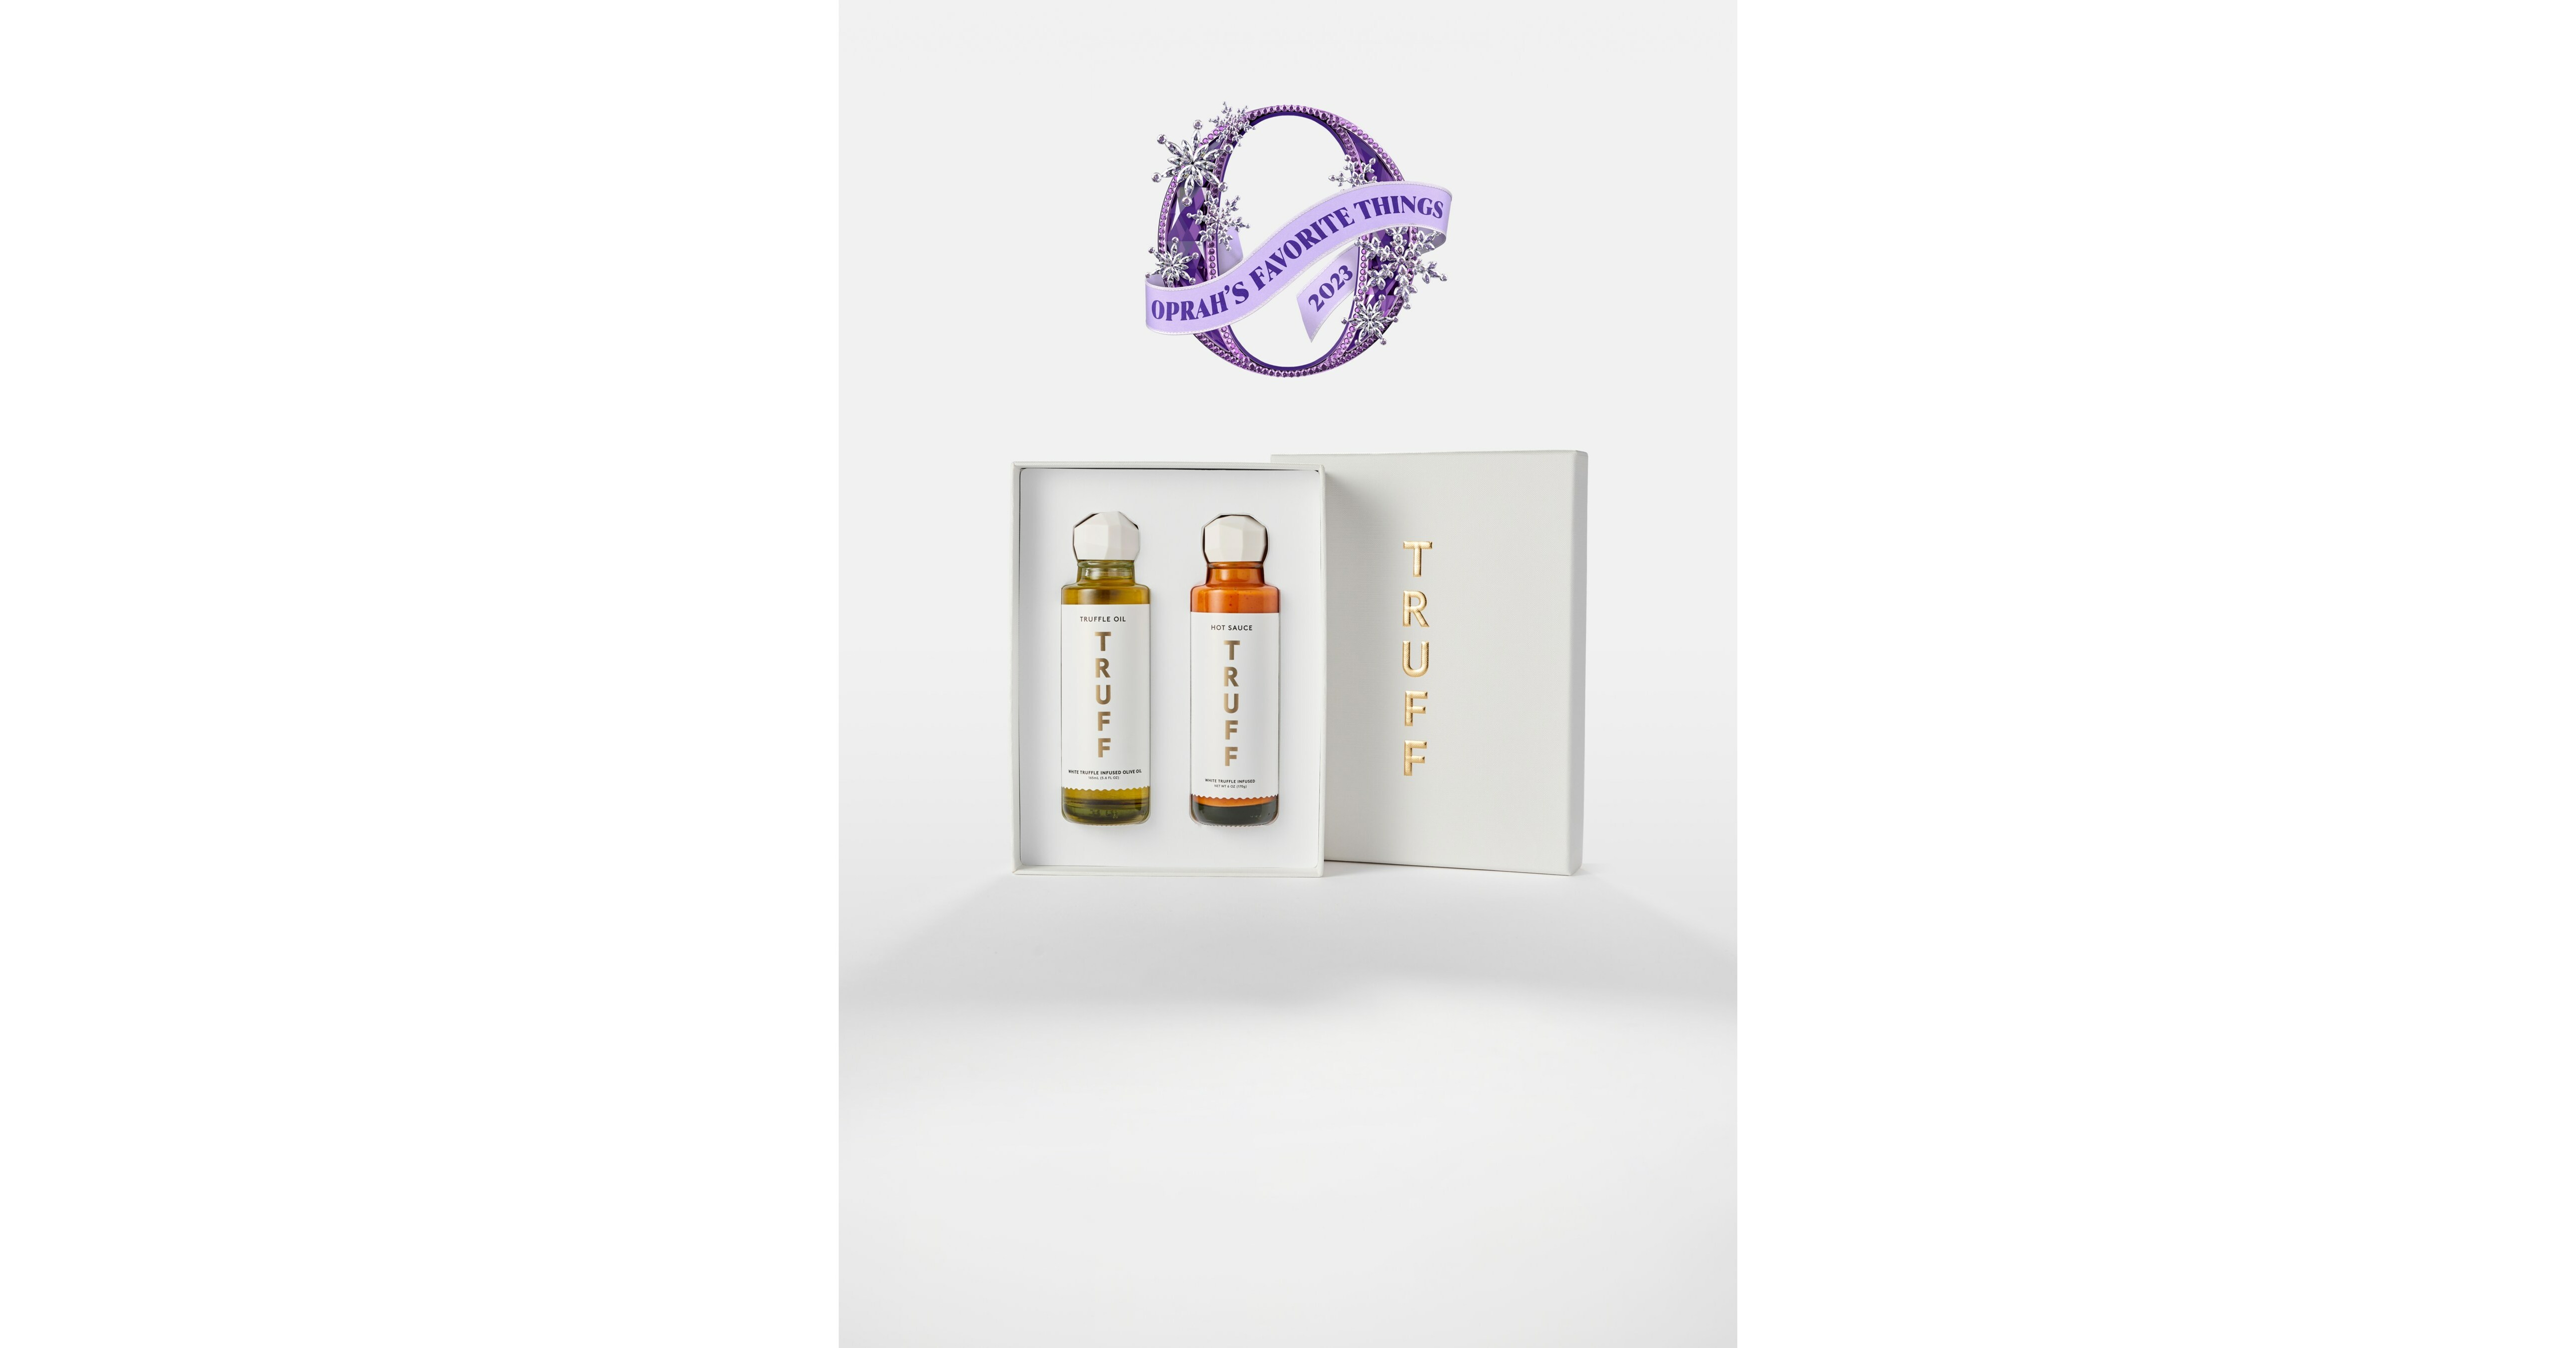 TRUFF'S WHITE TRUFFLE GIFT SET SELECTED AS ONE OF OPRAH'S FAVORITE